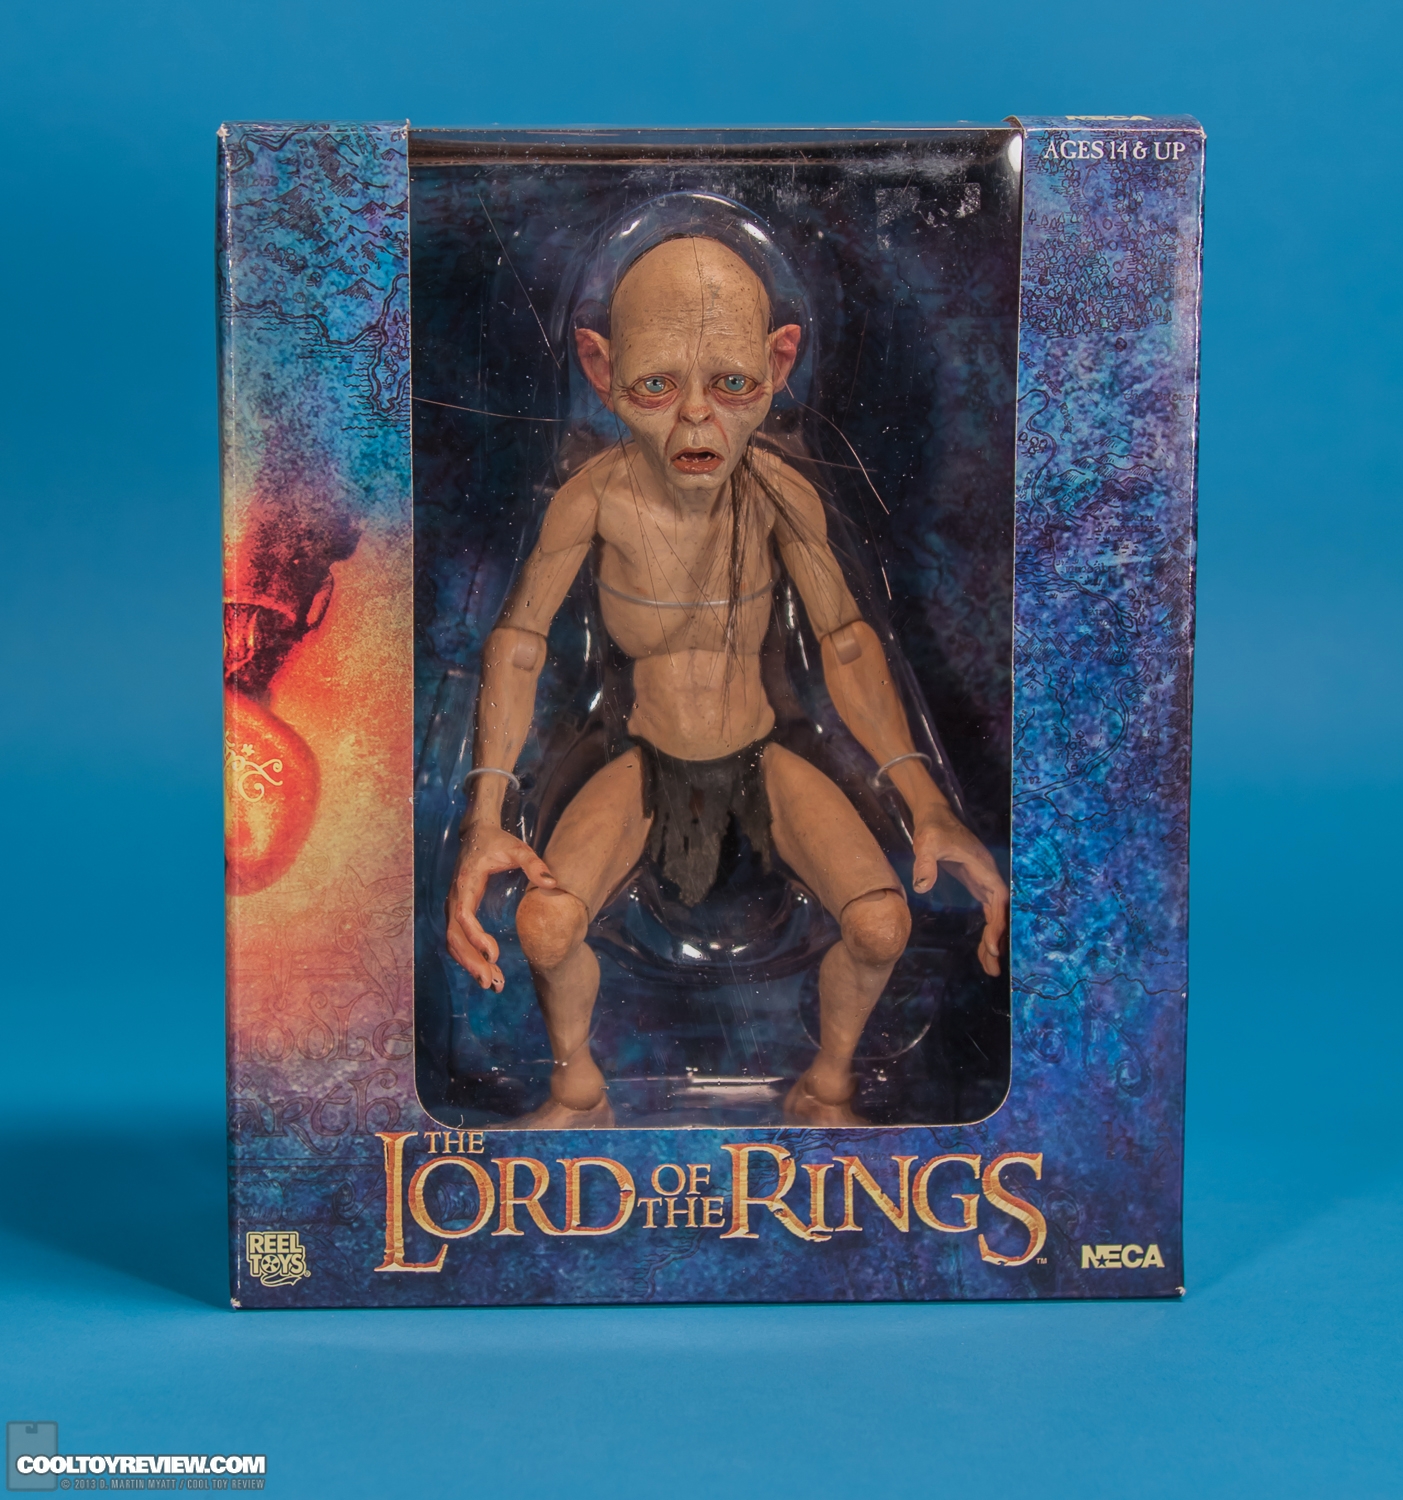 Smeagol_Lord_Of_The_Rings_NECA-015.jpg